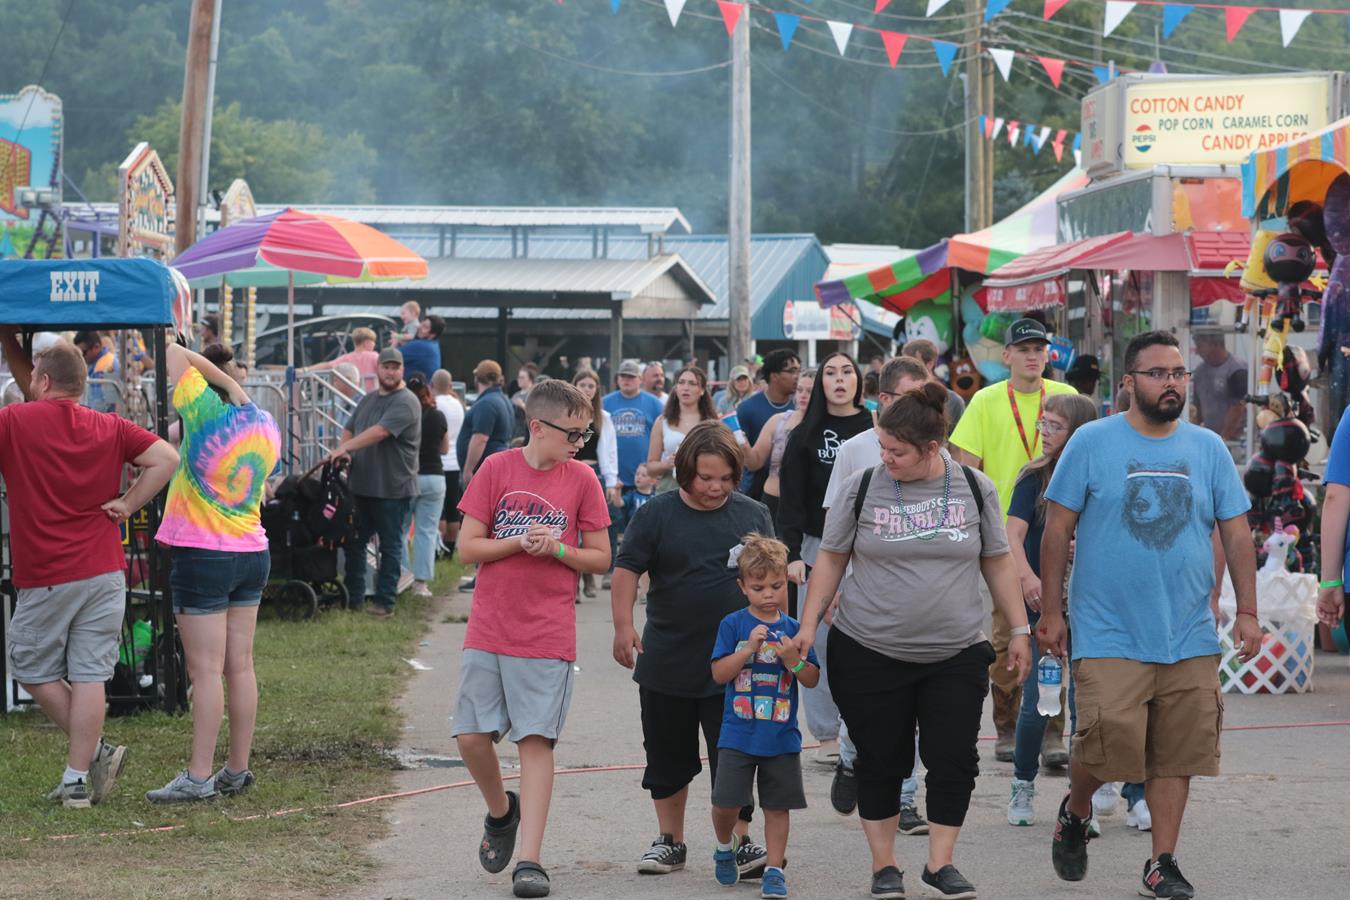 About The Muskingum County Fairgrounds